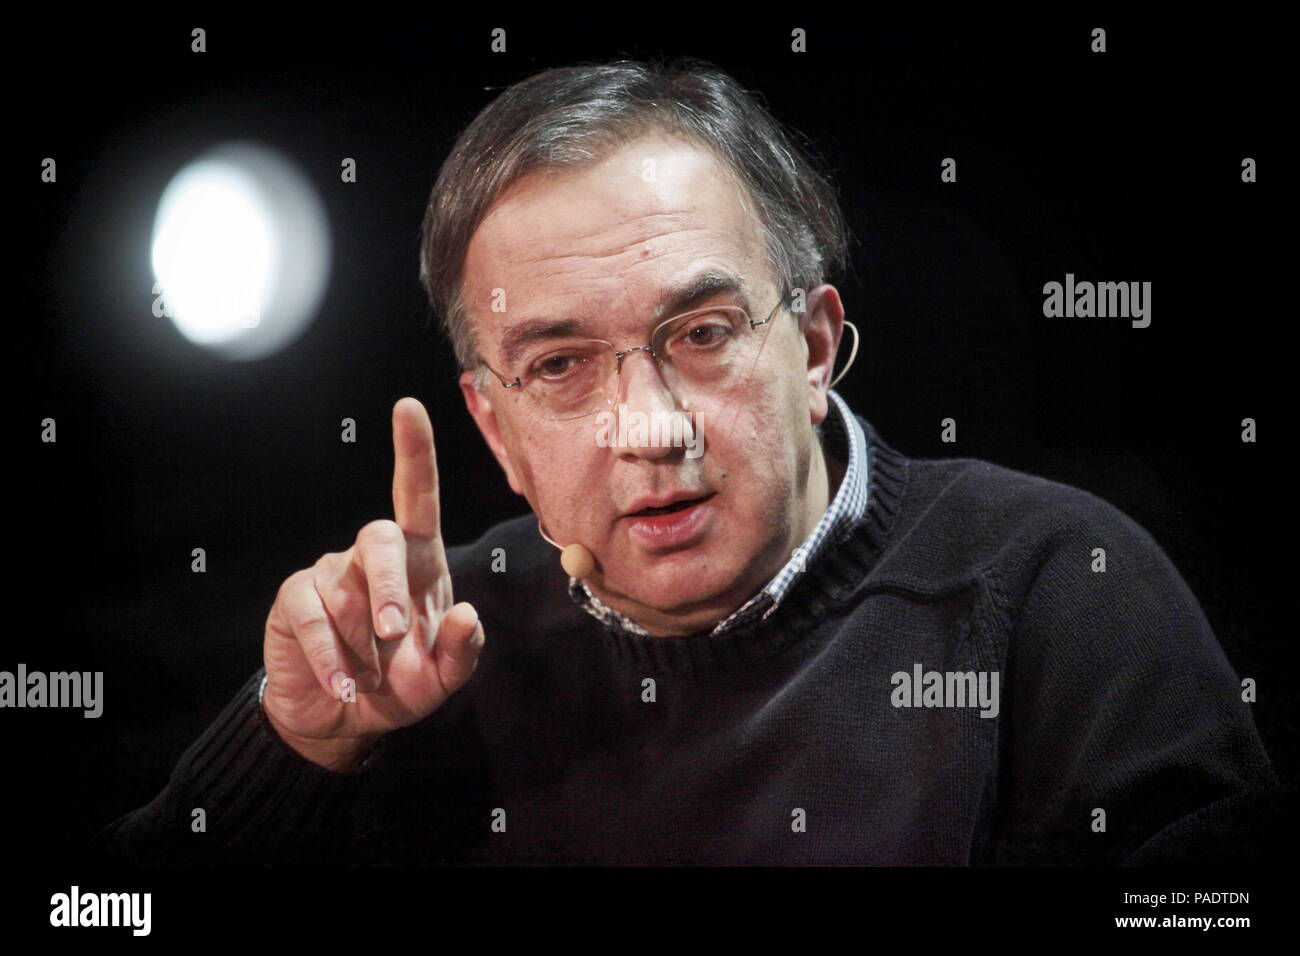 Milan, Italy - 3 feb 2013: Sergio Marchionne chief executive officer of FCA speaks during a news conference Stock Photo